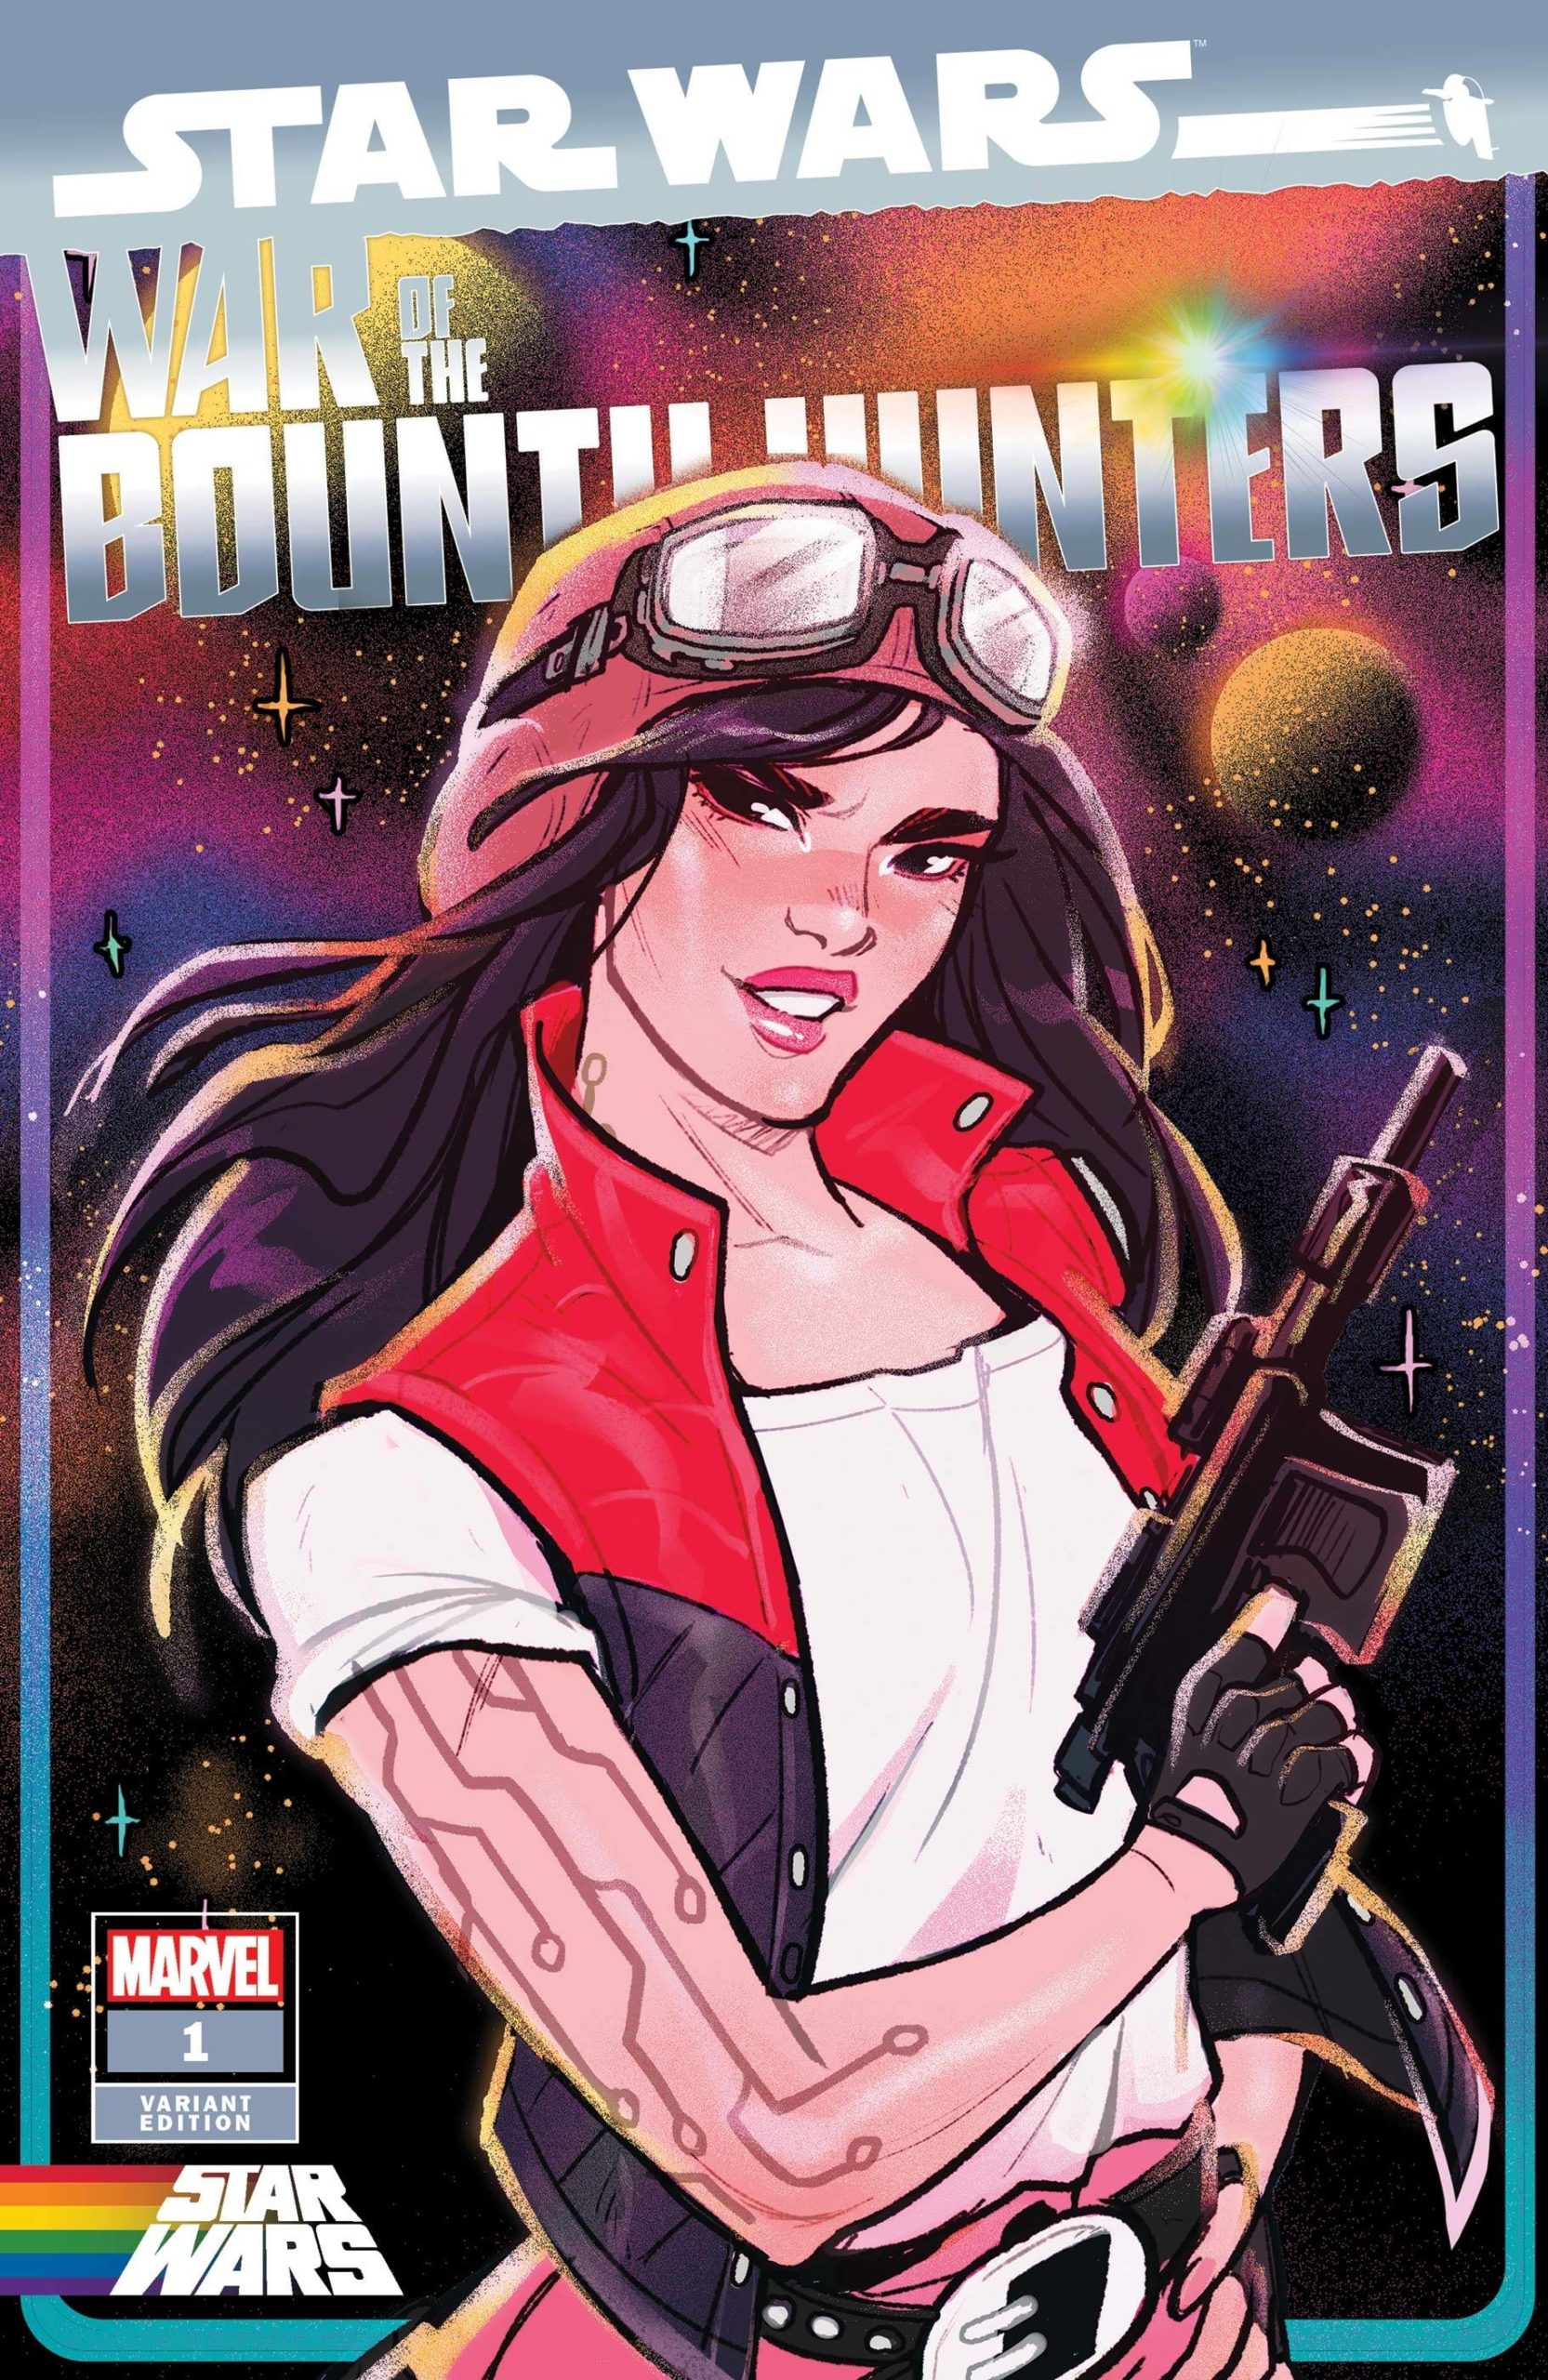 War of the Bounty Hunters #1 (Babs Tarr "Doctor Aphra" Pride Variant Cover) (02.06.2021)